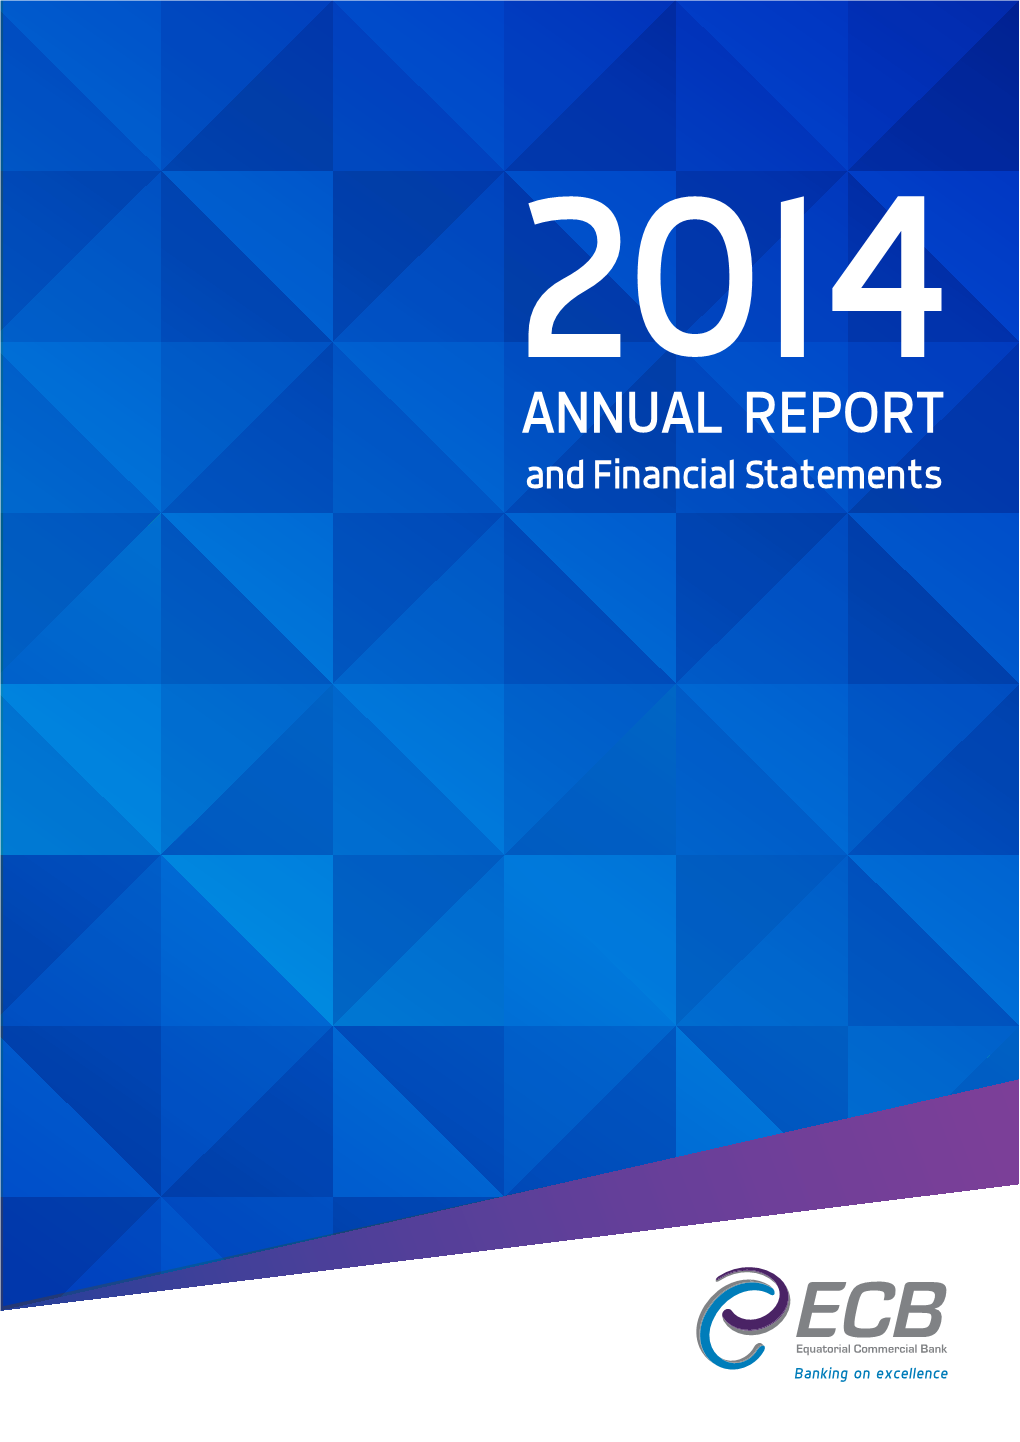 ANNUAL REPORT and Financial Statements